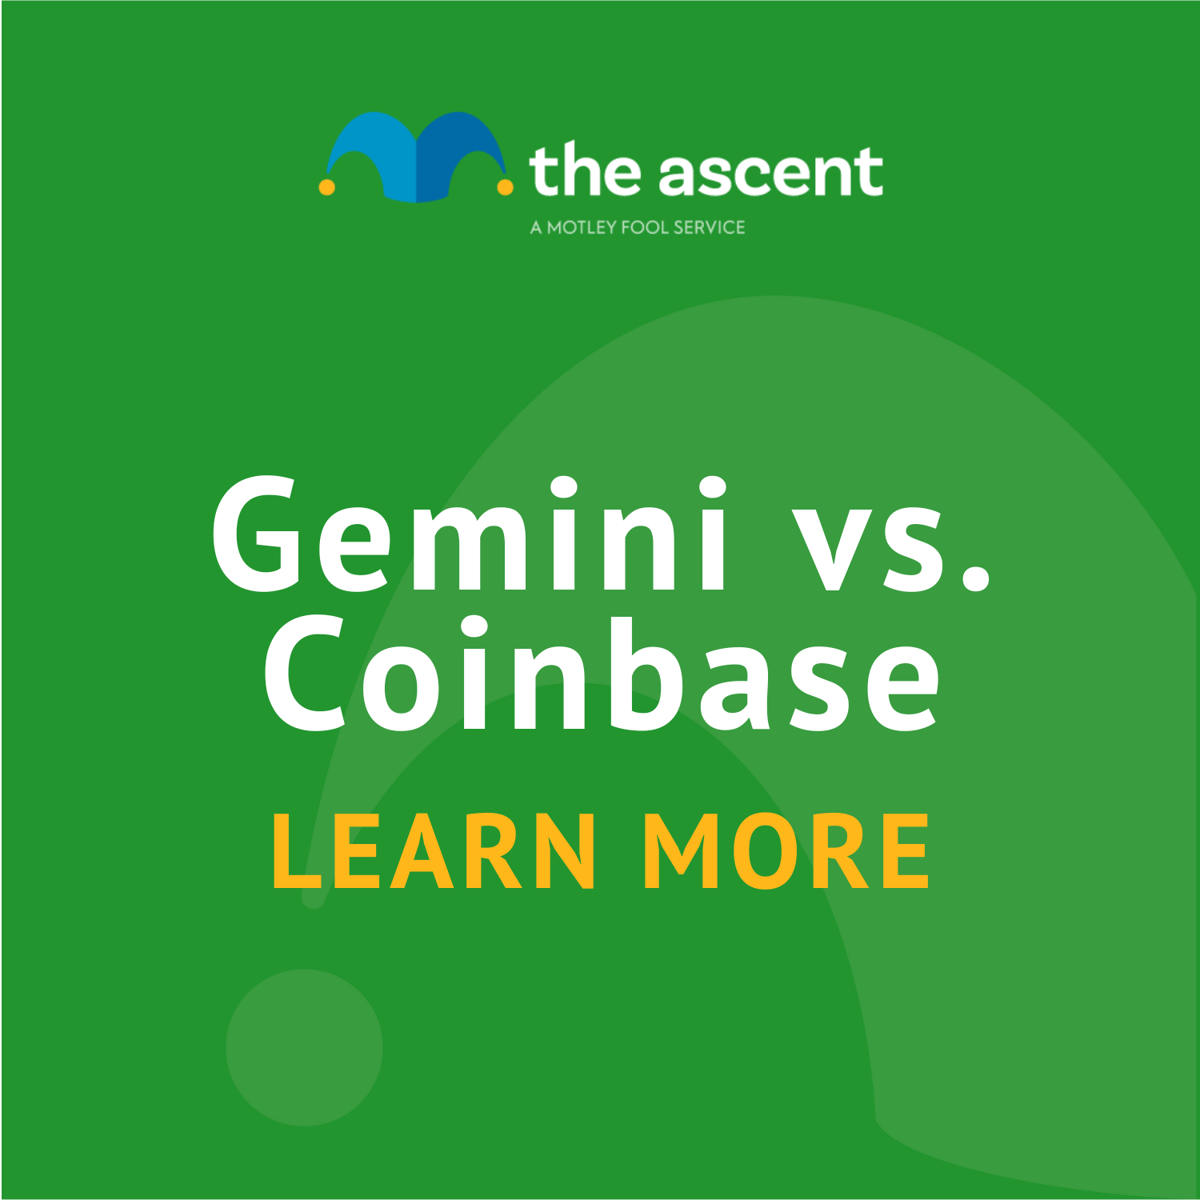 Gemini vs Coinbase Pro: Which is Better?